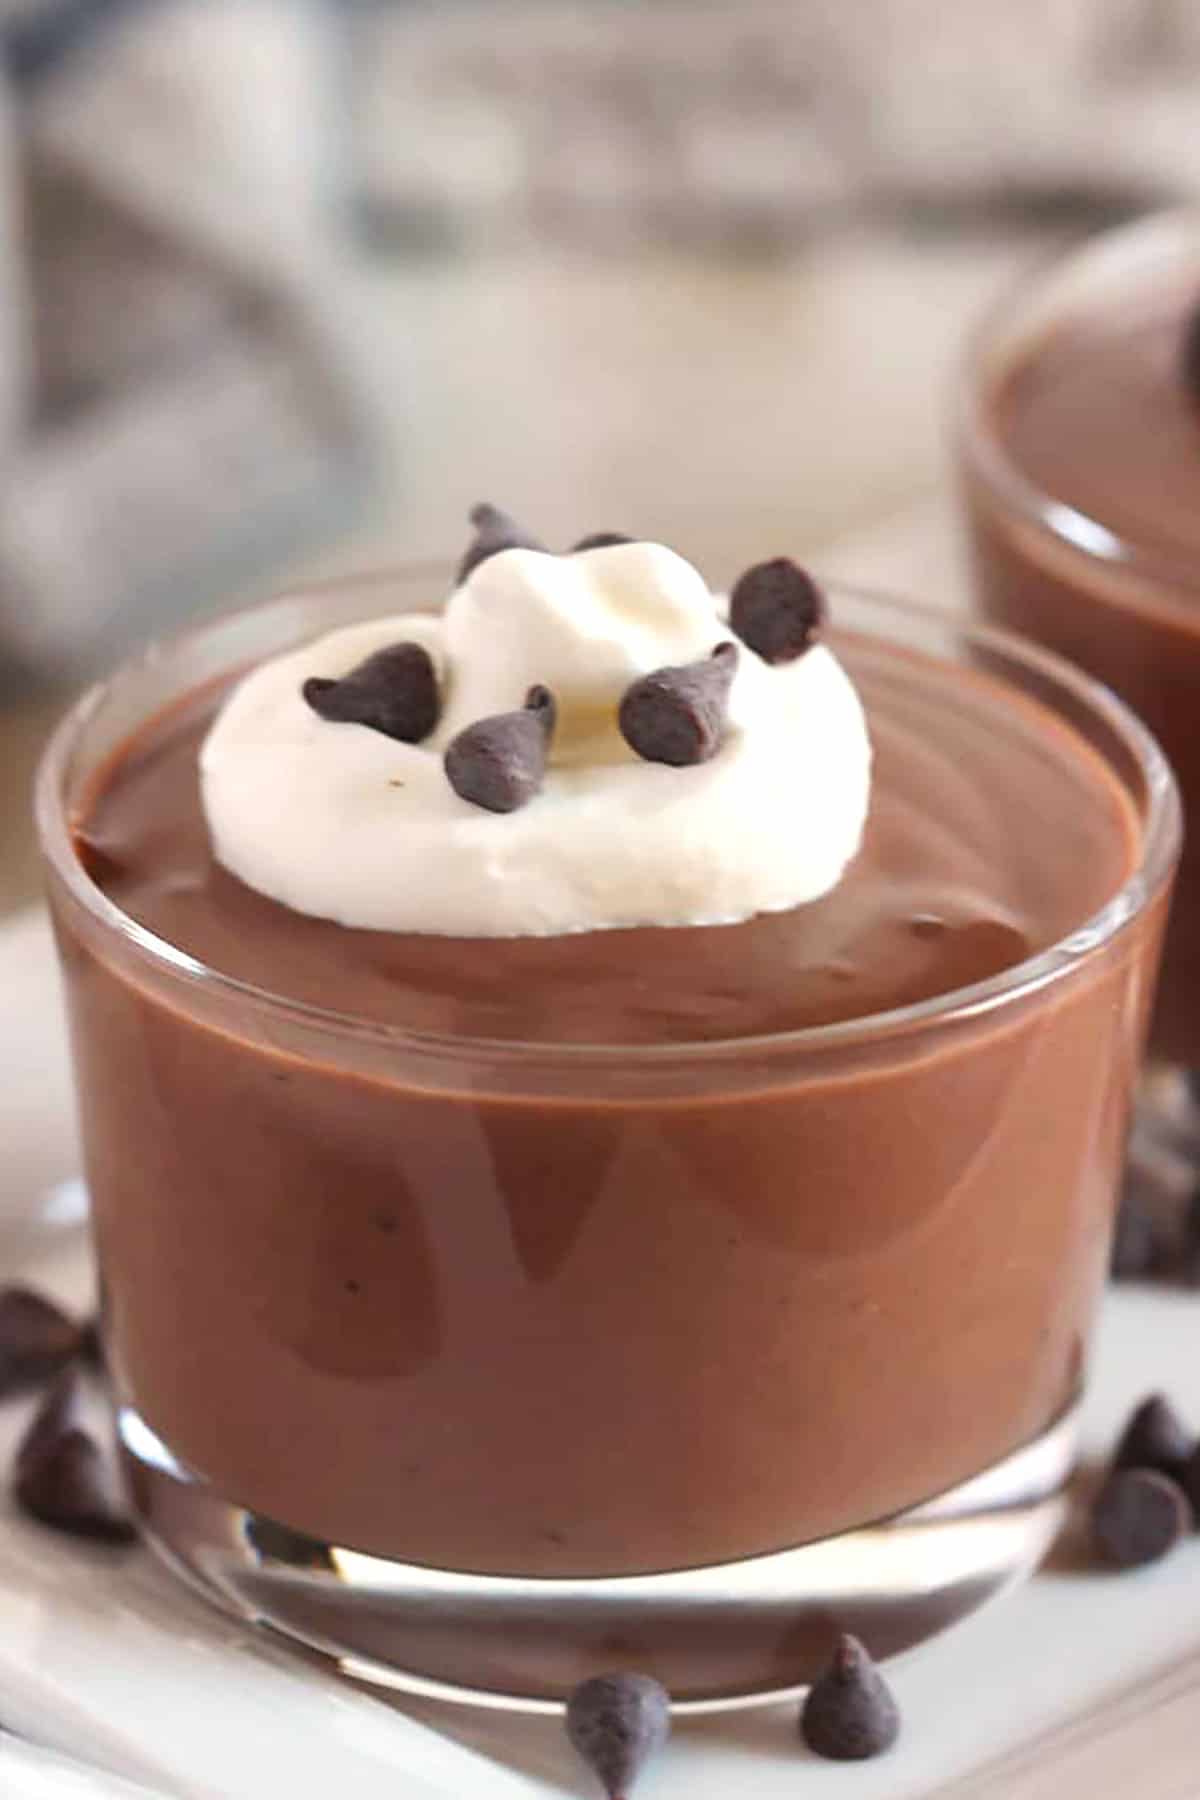 One small glass dish with chocolate pudding topped with whipped cream.